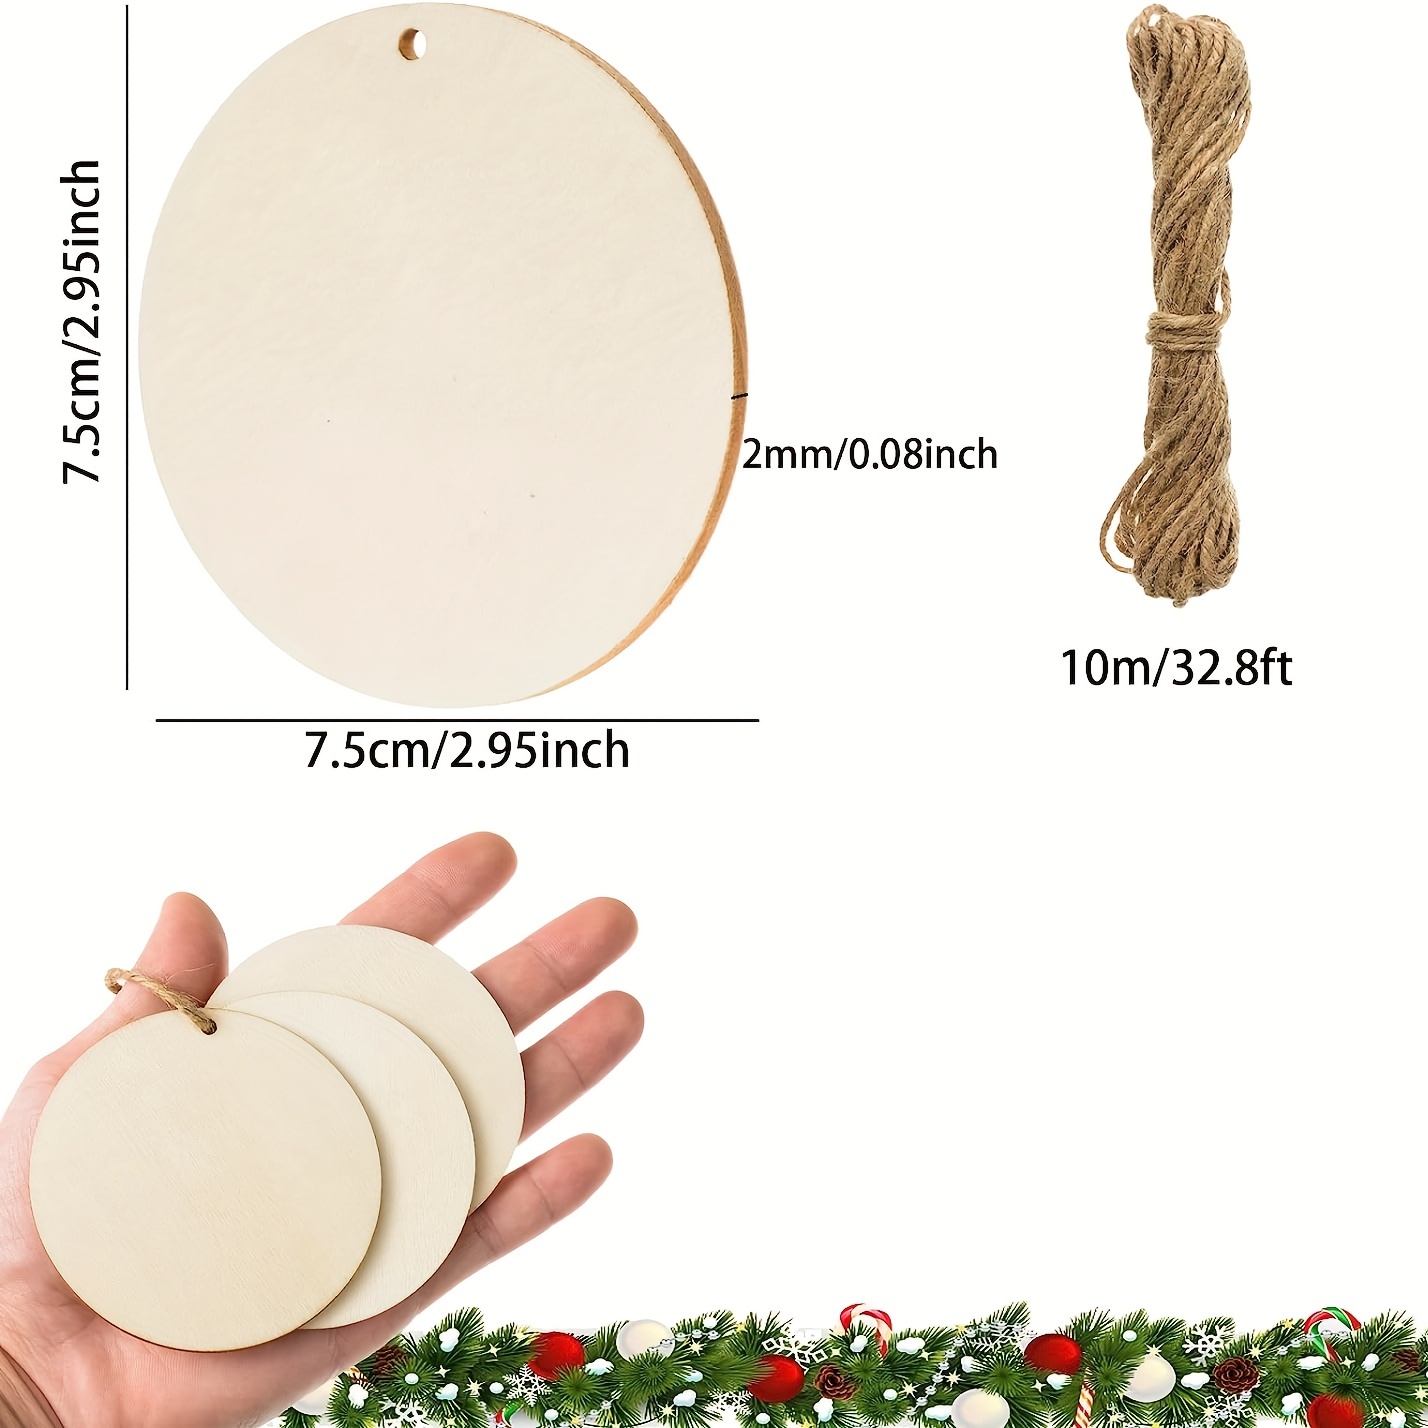 3 Pieces 12 inch Wood Circles for Crafts - Unfinished Blank Wooden Circle, Wood Slices for Painting, Home, Party, Holiday Decor